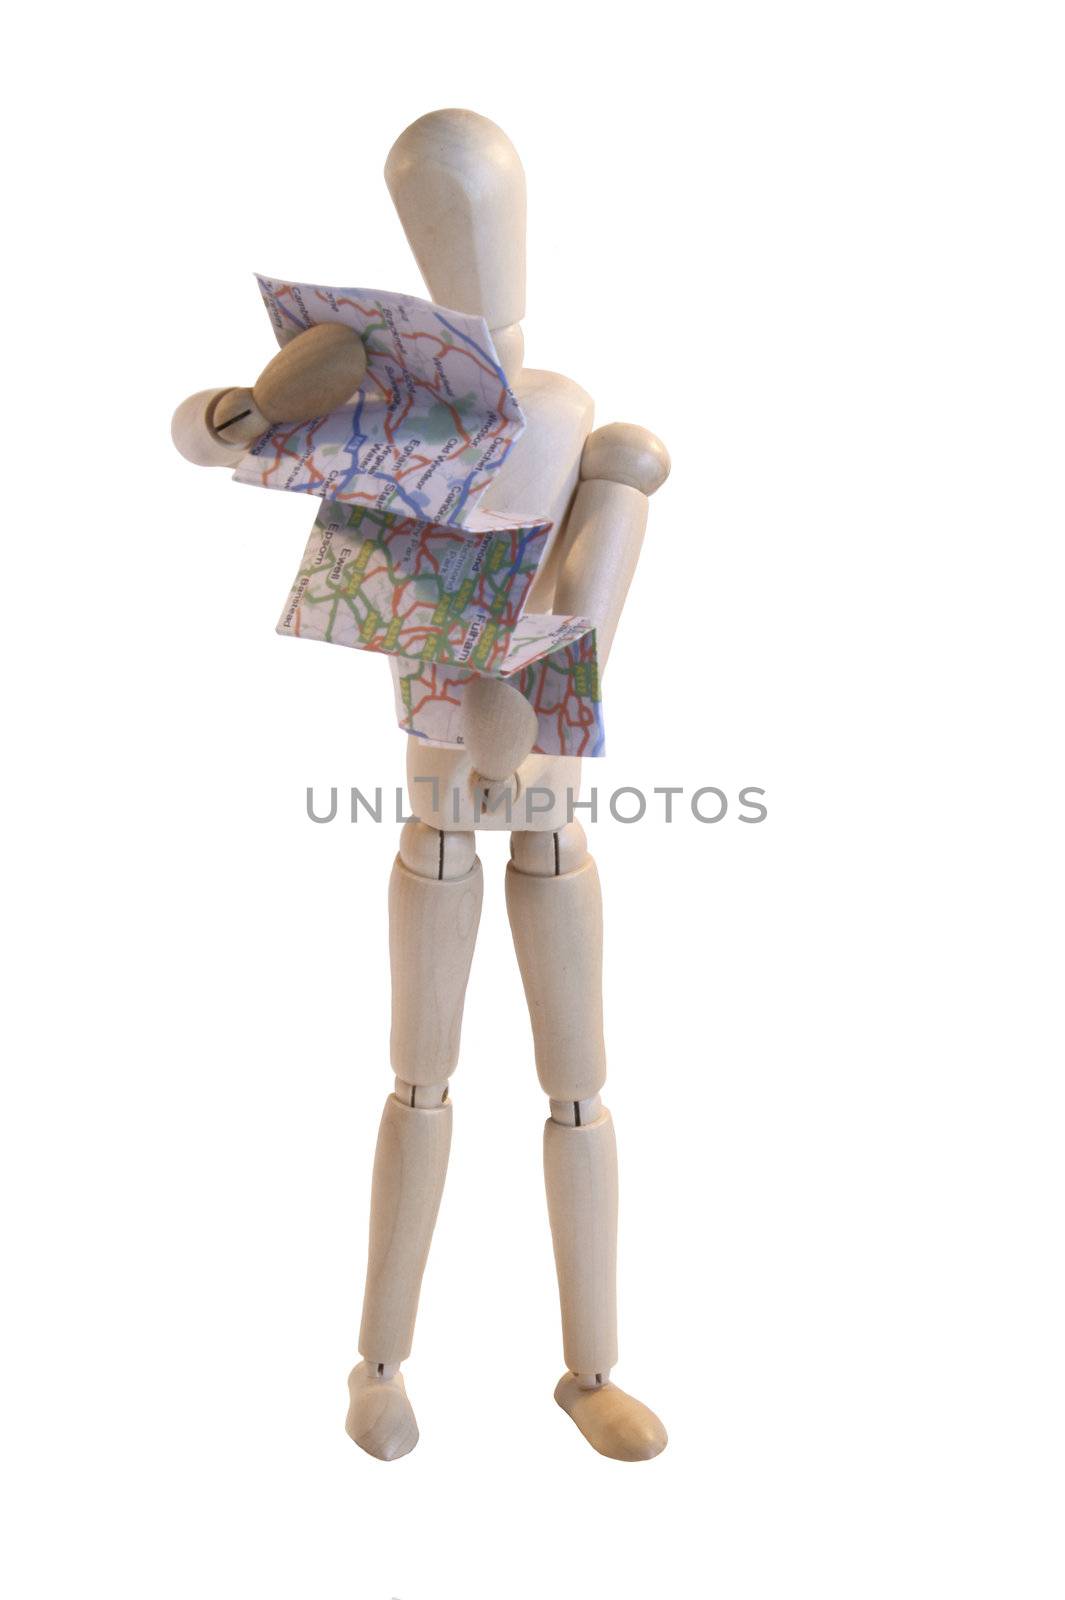 wooden artists dummy in pose as if reading map